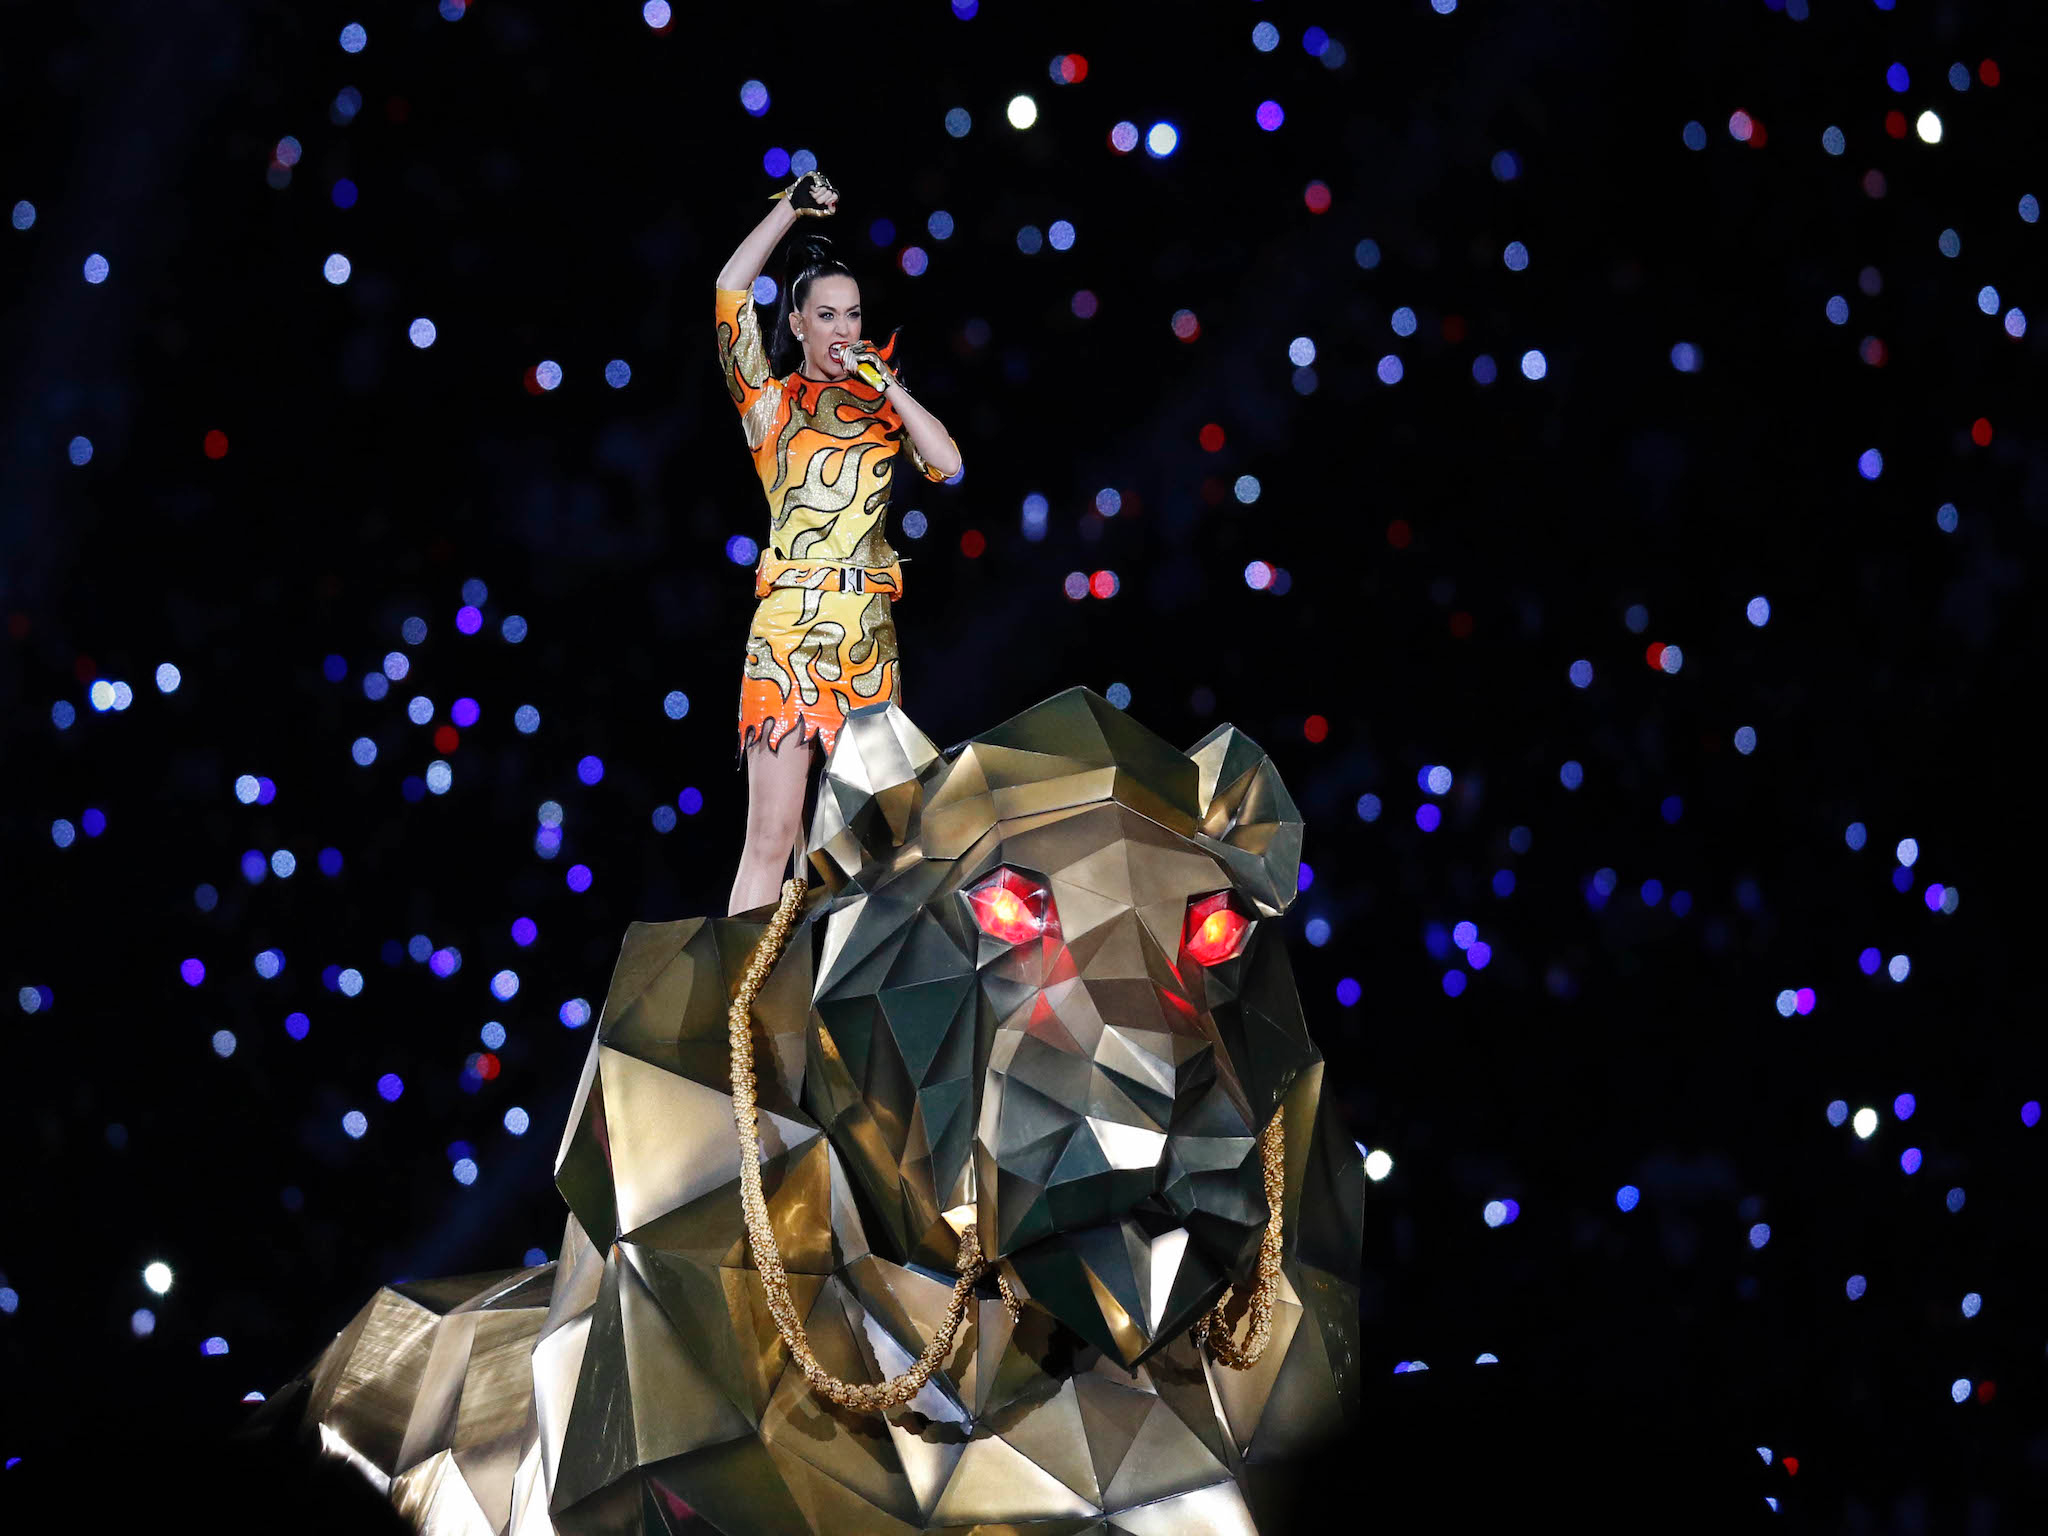 Katy Perry appeared on the back of a metallic lion (or tiger)